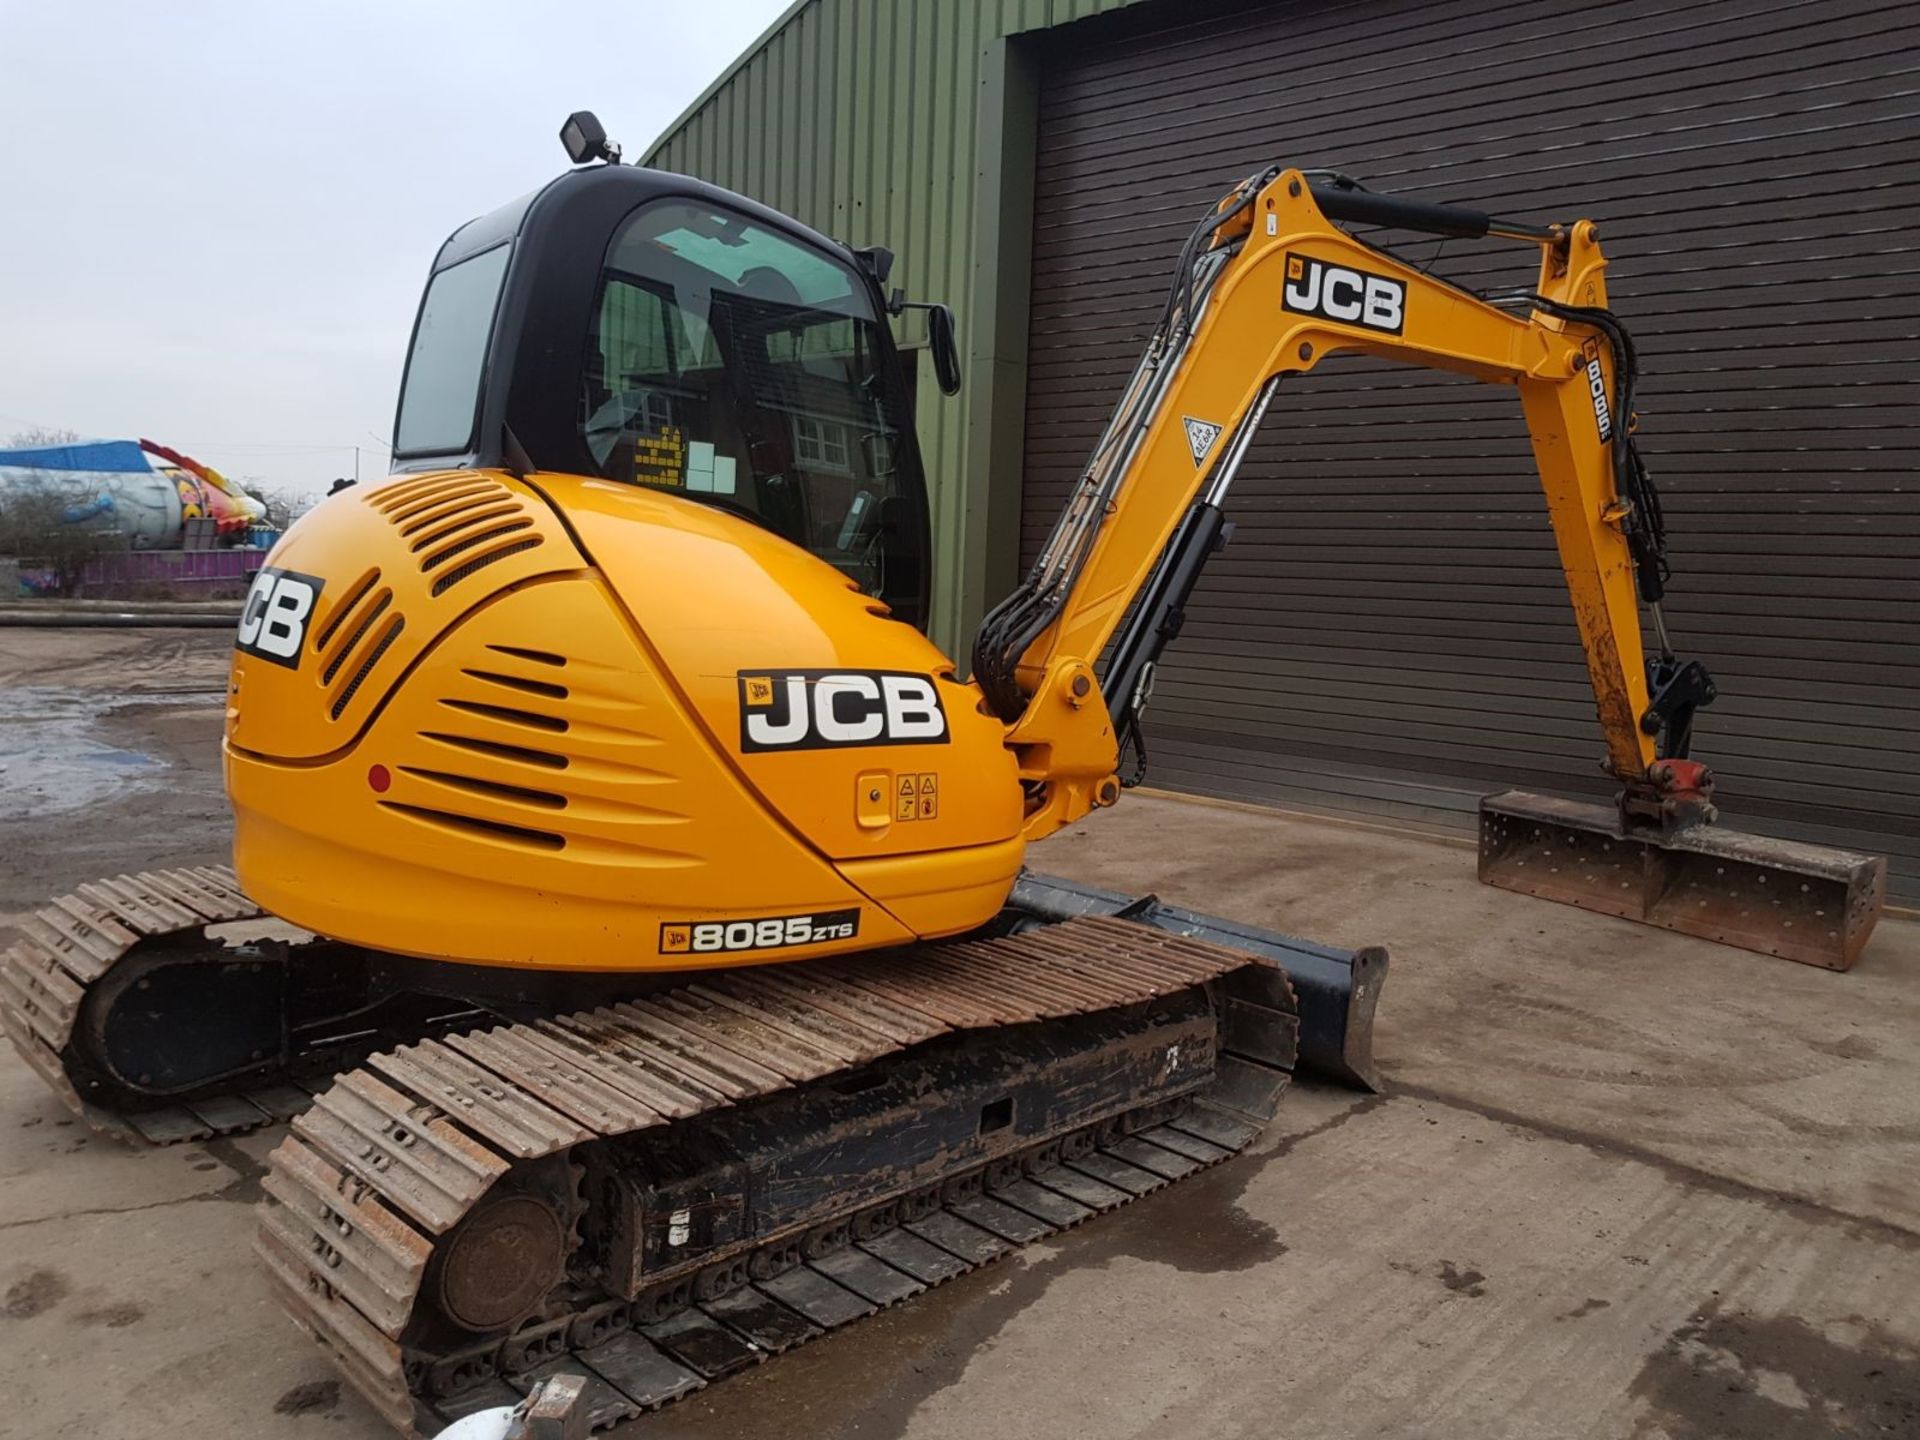 JCB 8085 360° Midi Excavator, Serial No -, Year of Manufacture -, Indicated Hours: 4320, Wide - Image 4 of 10